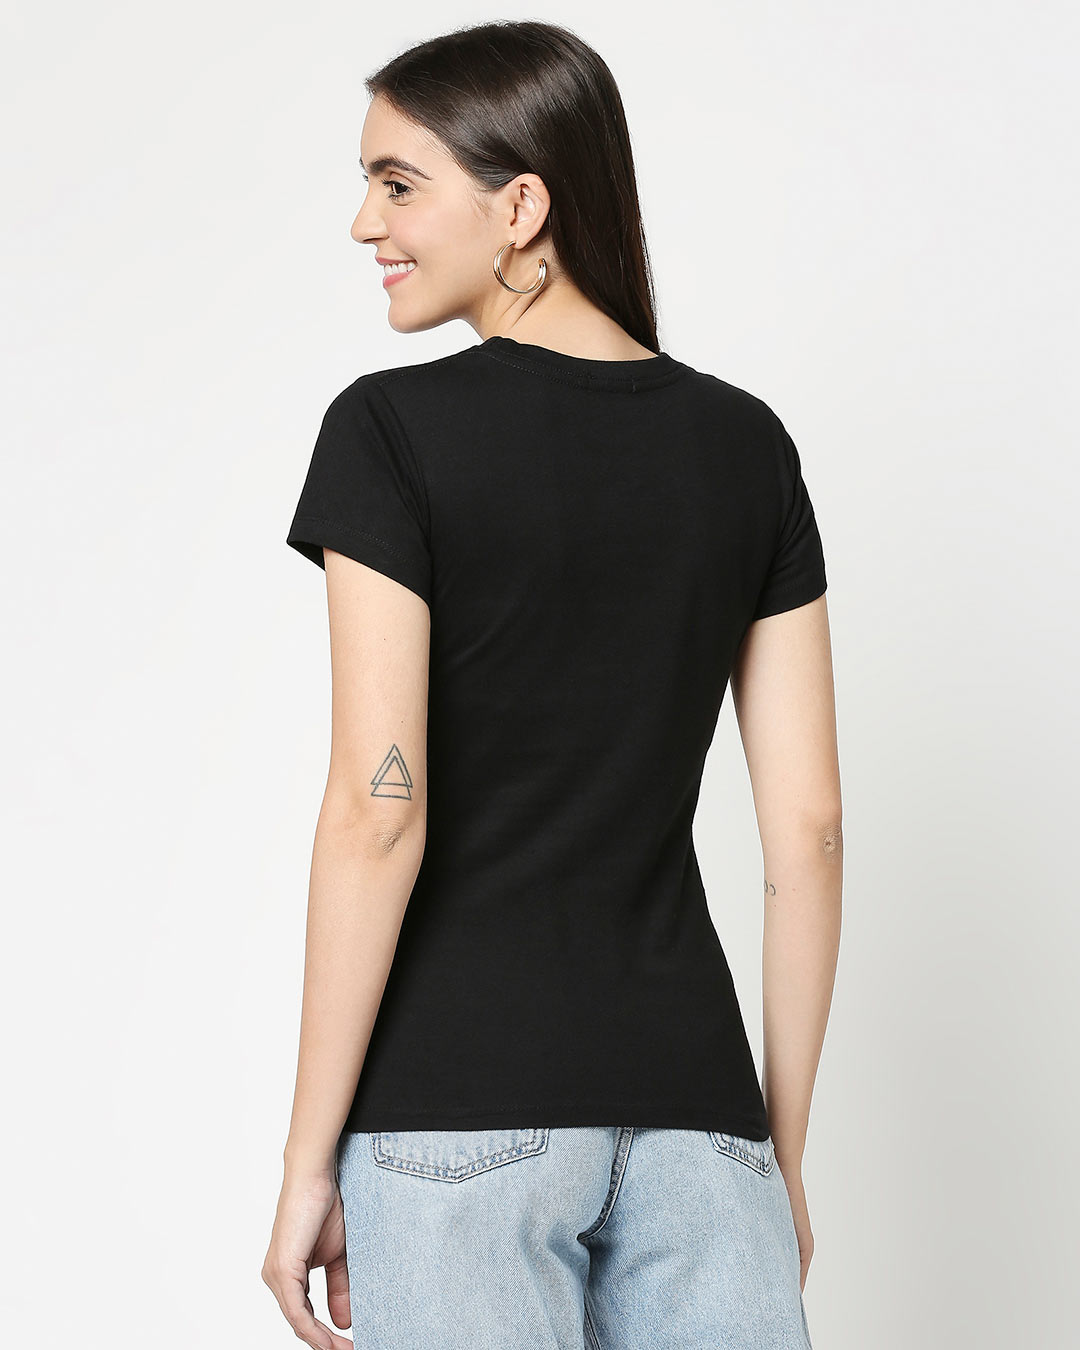 Shop Women's Black Hey There Stay There (TJL) Printed Slim Fit T-shirt-Back